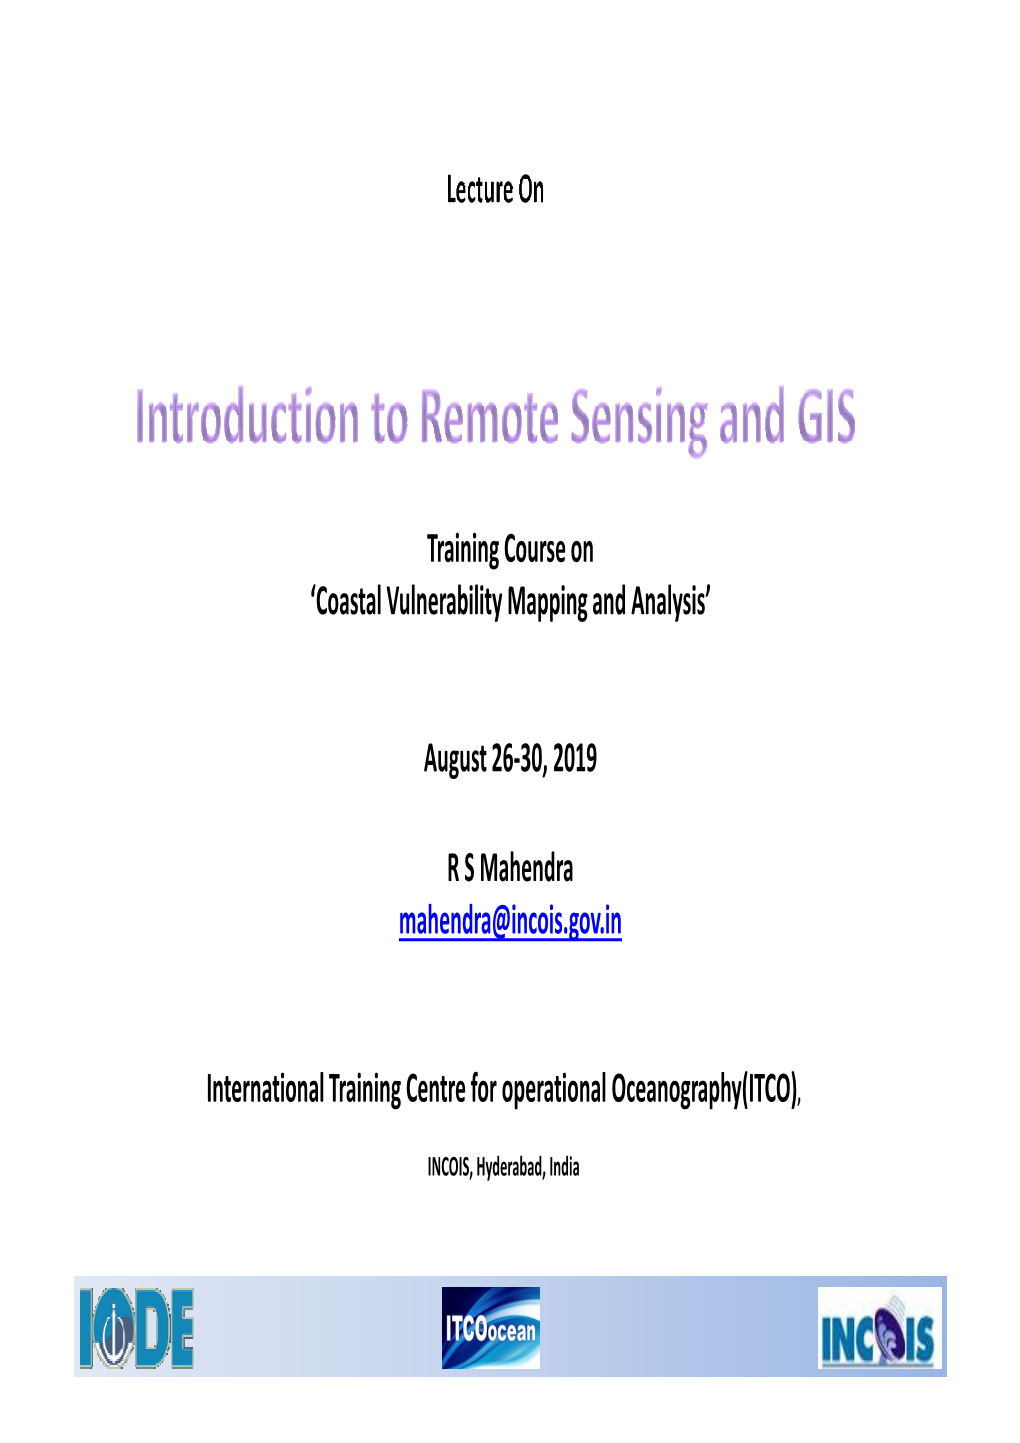 INTRODUCTION to REMOTE SENSING and GIS.Pdf